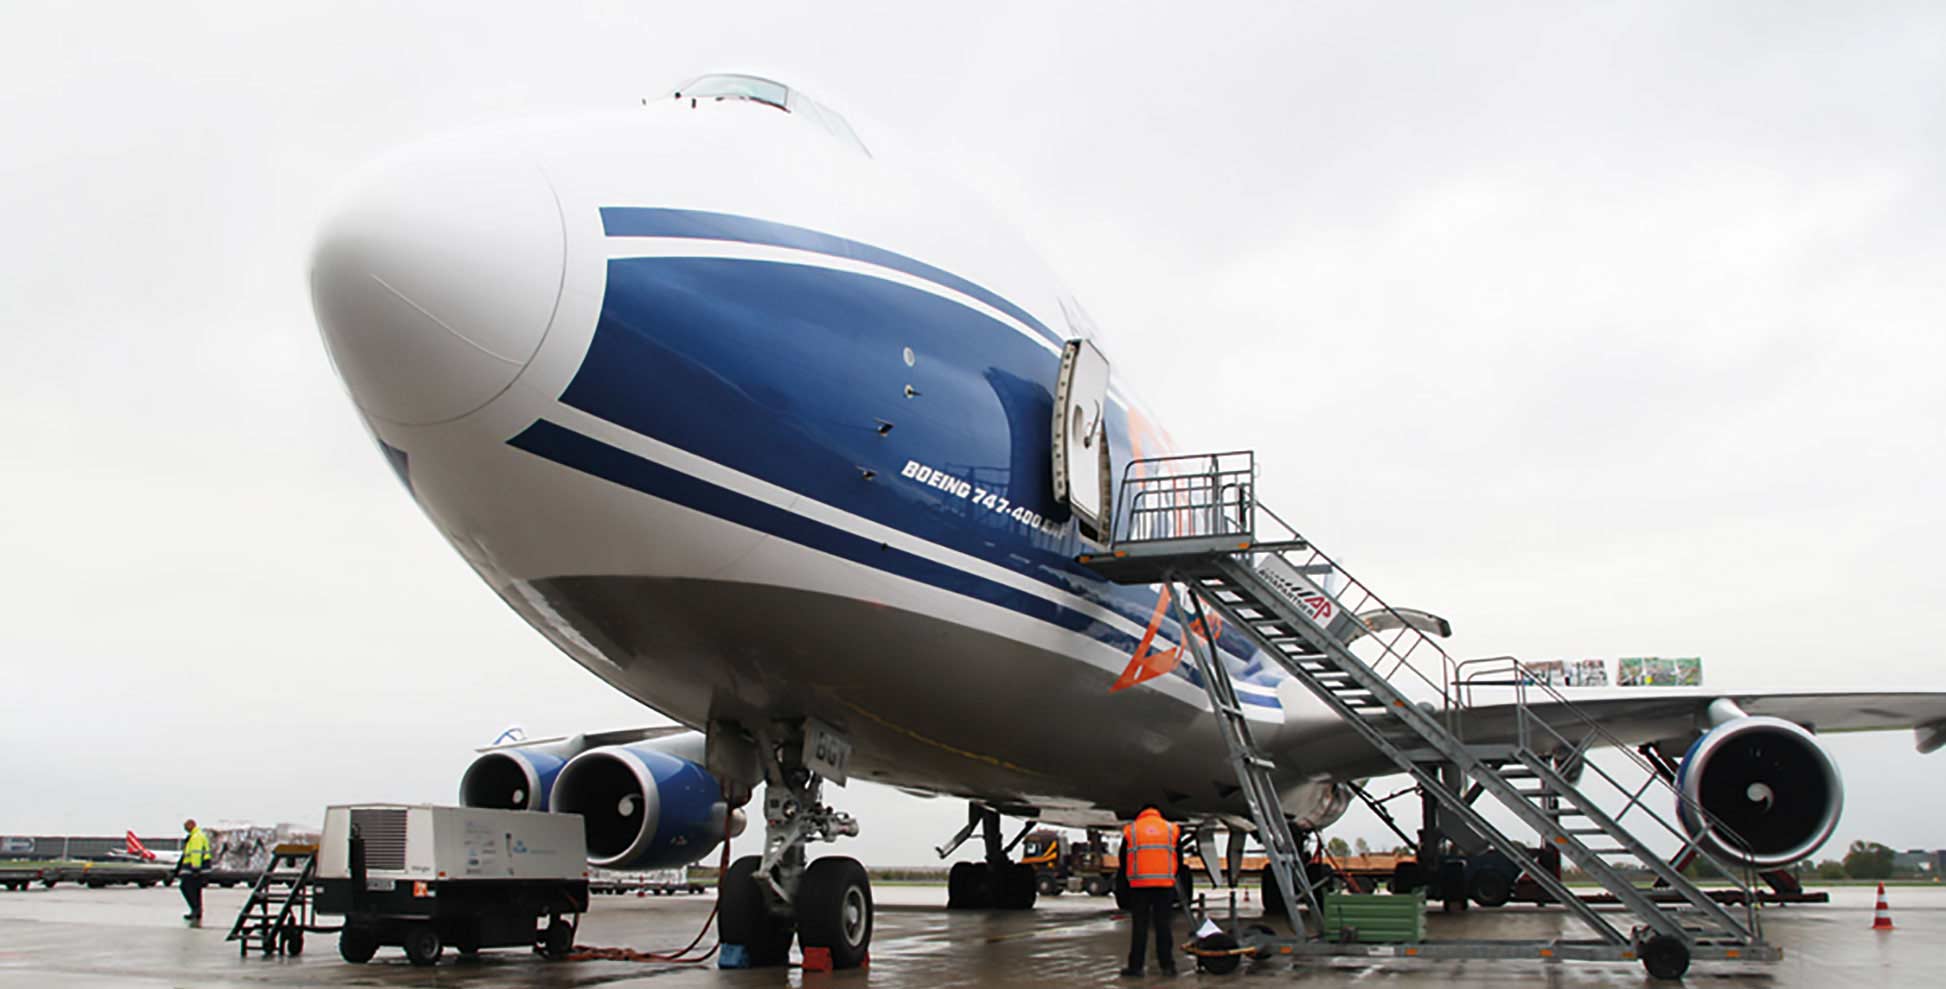 Loading of air freight